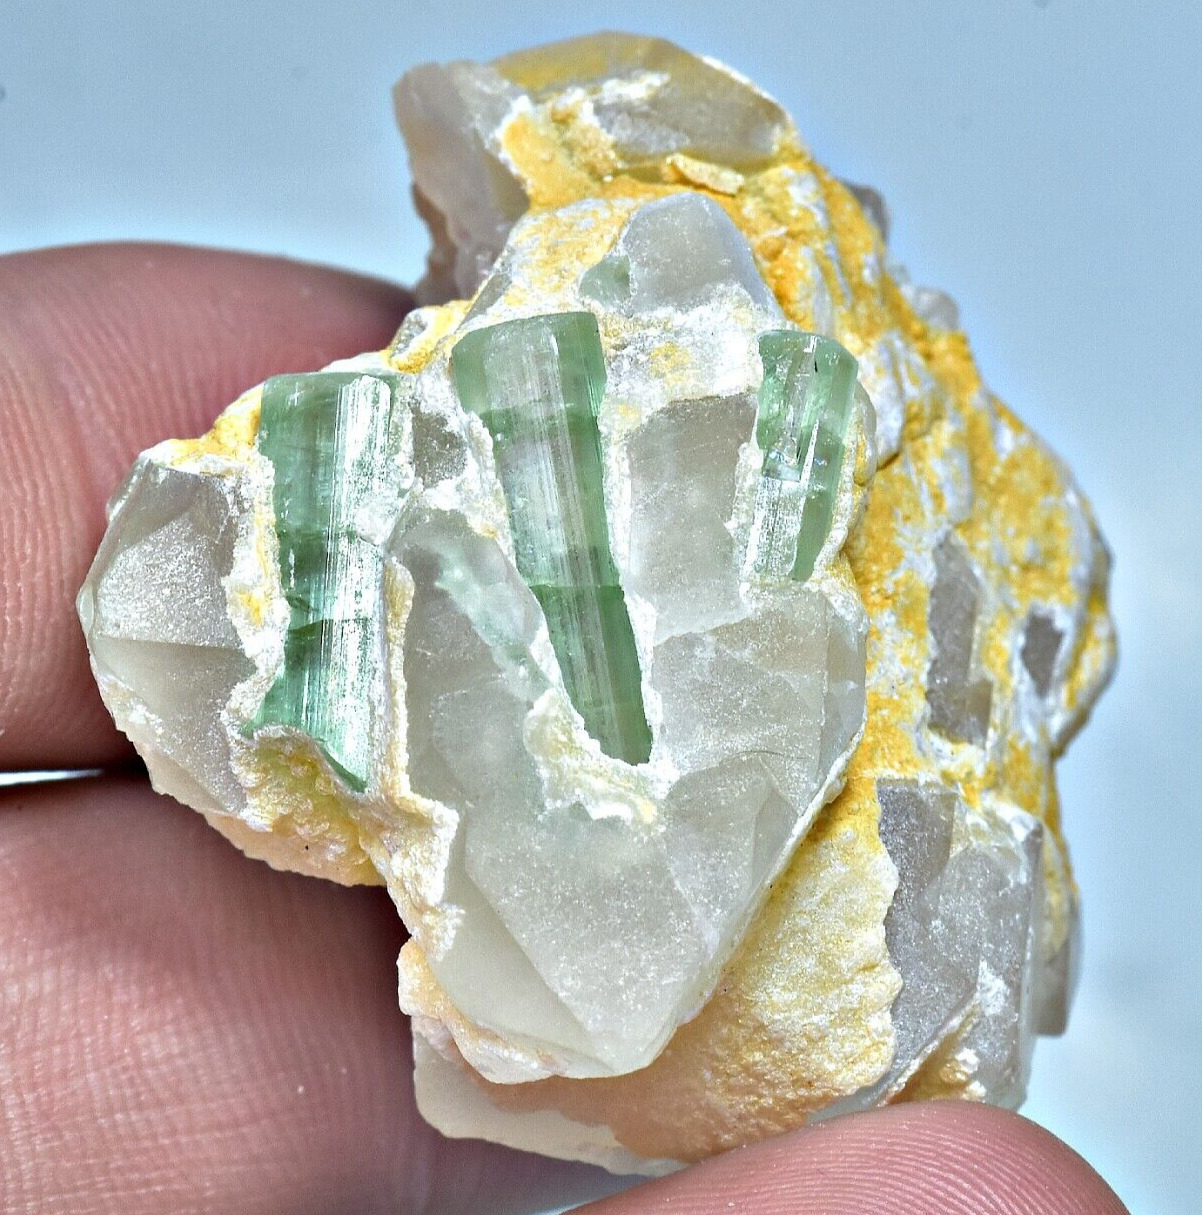 145 CT Top Quality Amazing Tourmaline Crystals On Quartz From Kunar Afghanistan